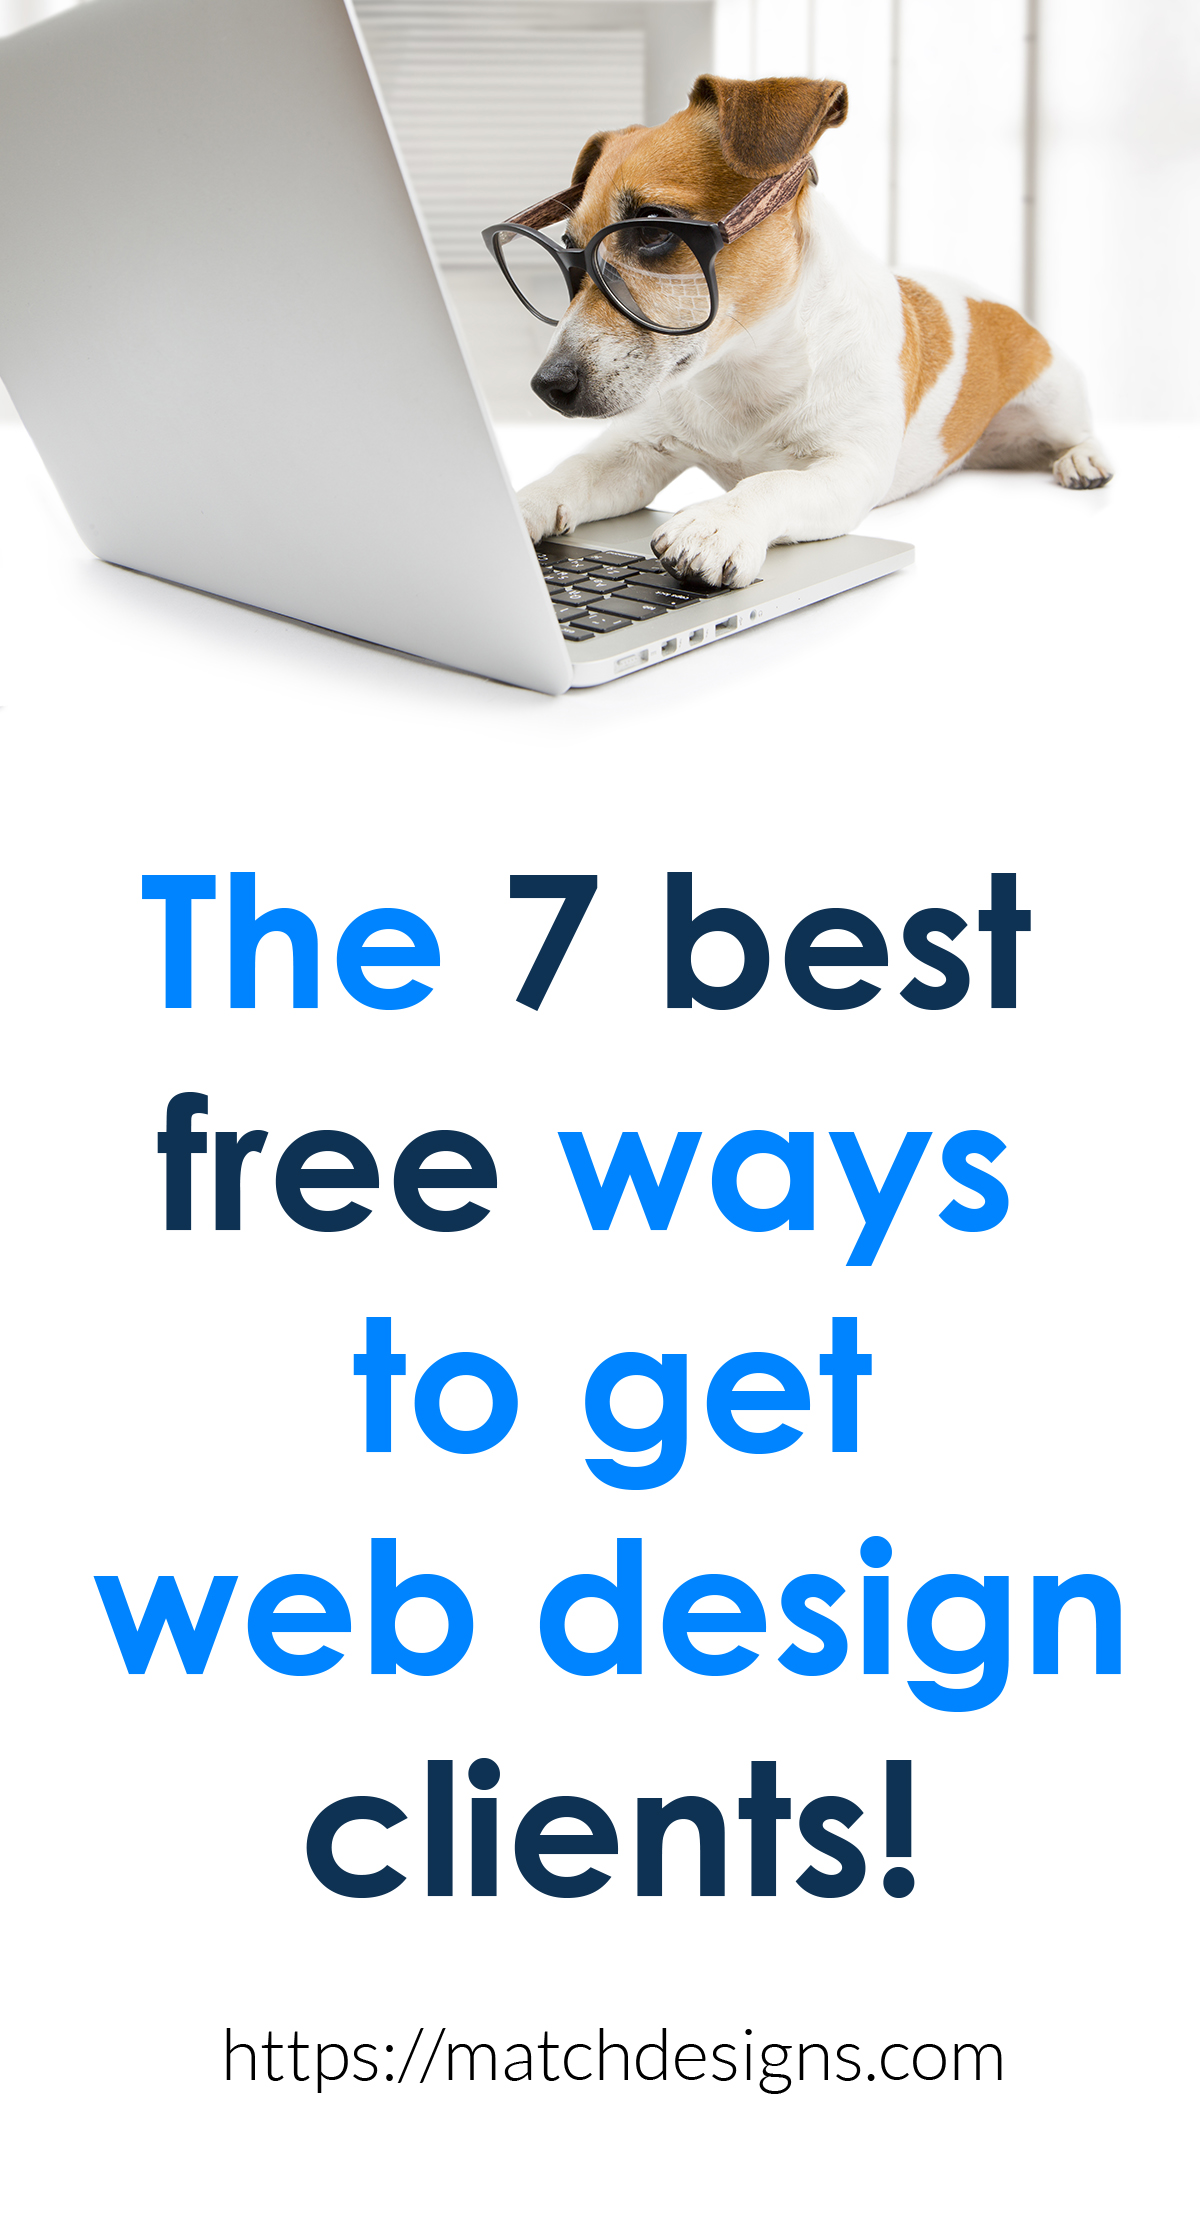 The 7 best free ways to get web design clients